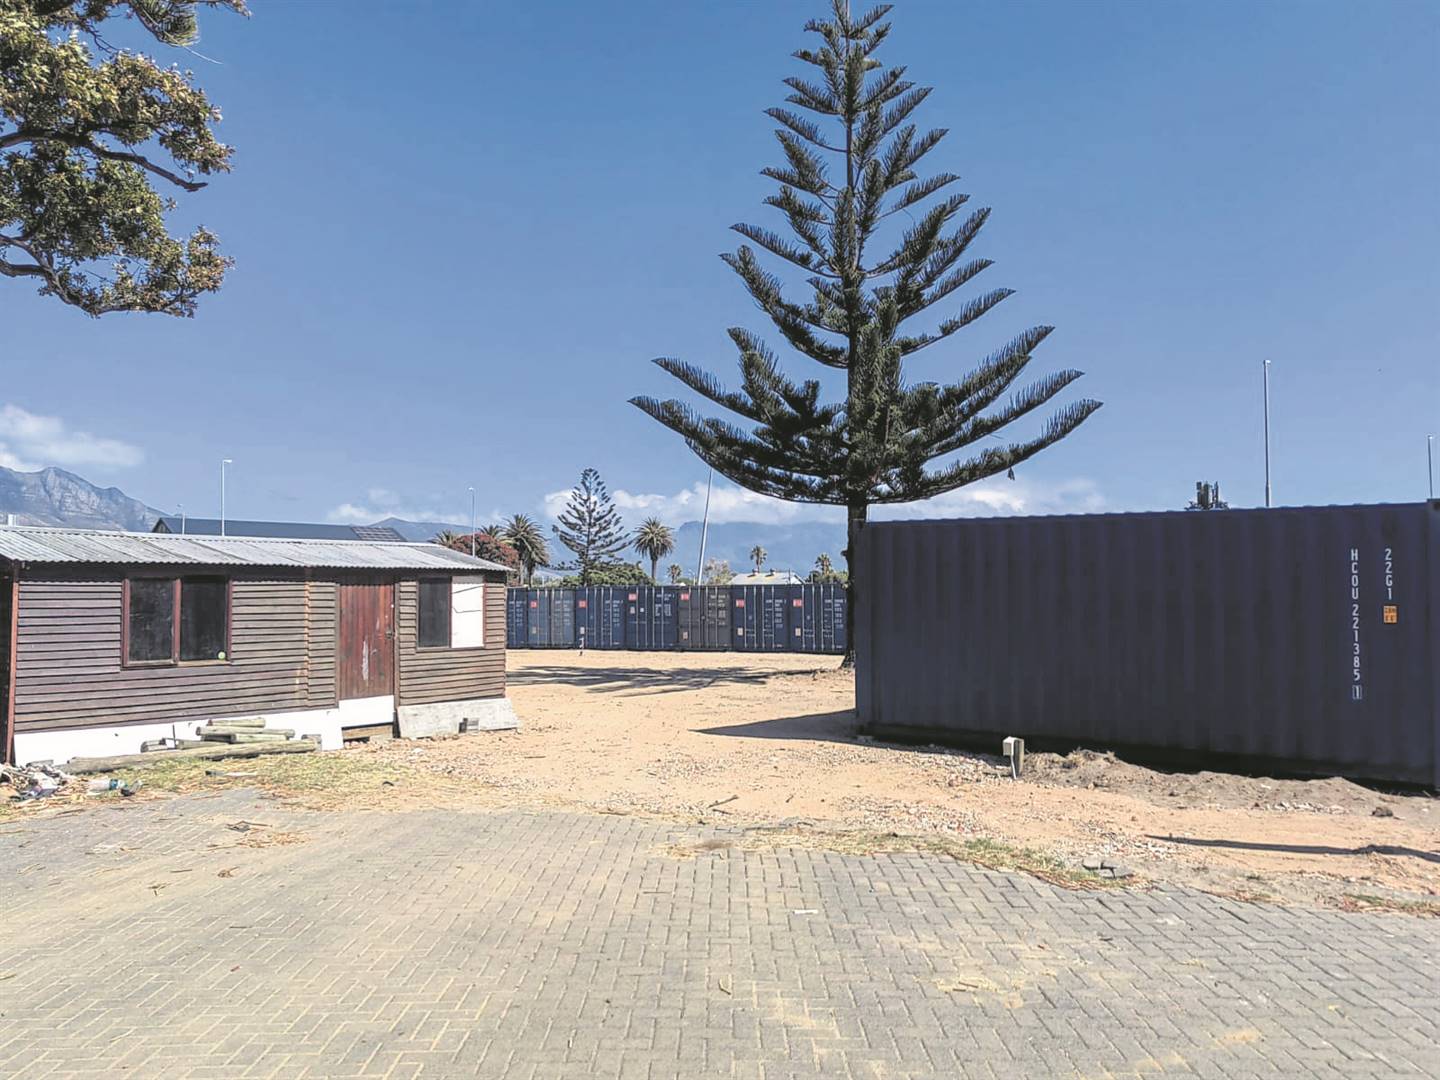 The remaining containers at the premises of the Riverview Church of Christ in Lakeside is expected to be removed by mid May. PHOTO: Supplied